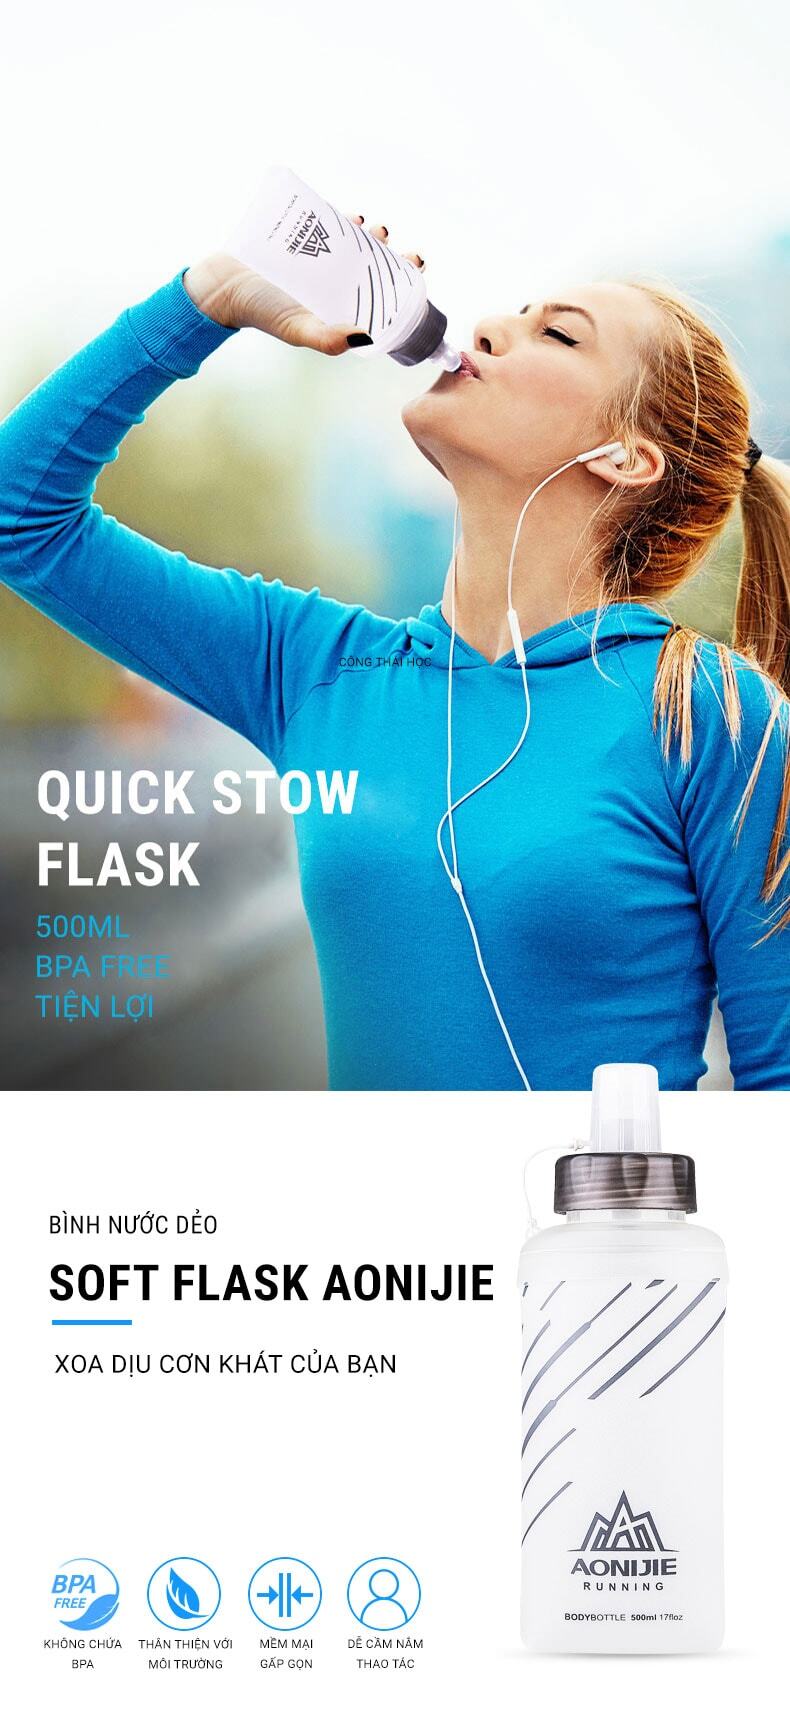 binh nuoc deo aonijie quick stow flask 500ml 007 Bình nước dẻo Aonijie Quick Stow Flask (500ml) - YCB.vn